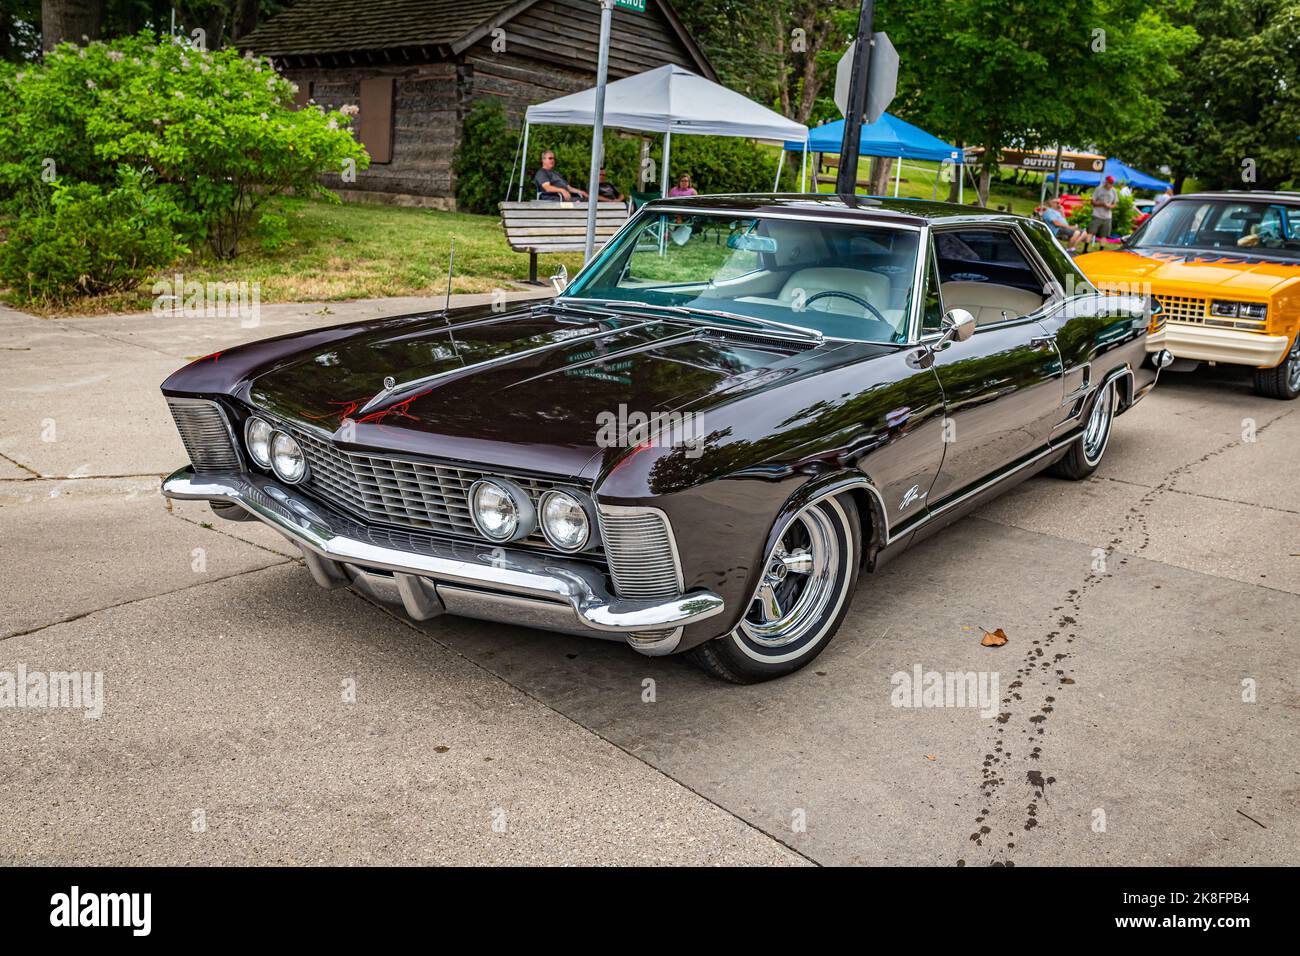 Des Moines, IA - July 01, 2022: High perspective front corner view of a 1964 Buick Riviera Hardtop Coupe at a local car show. Stock Photo